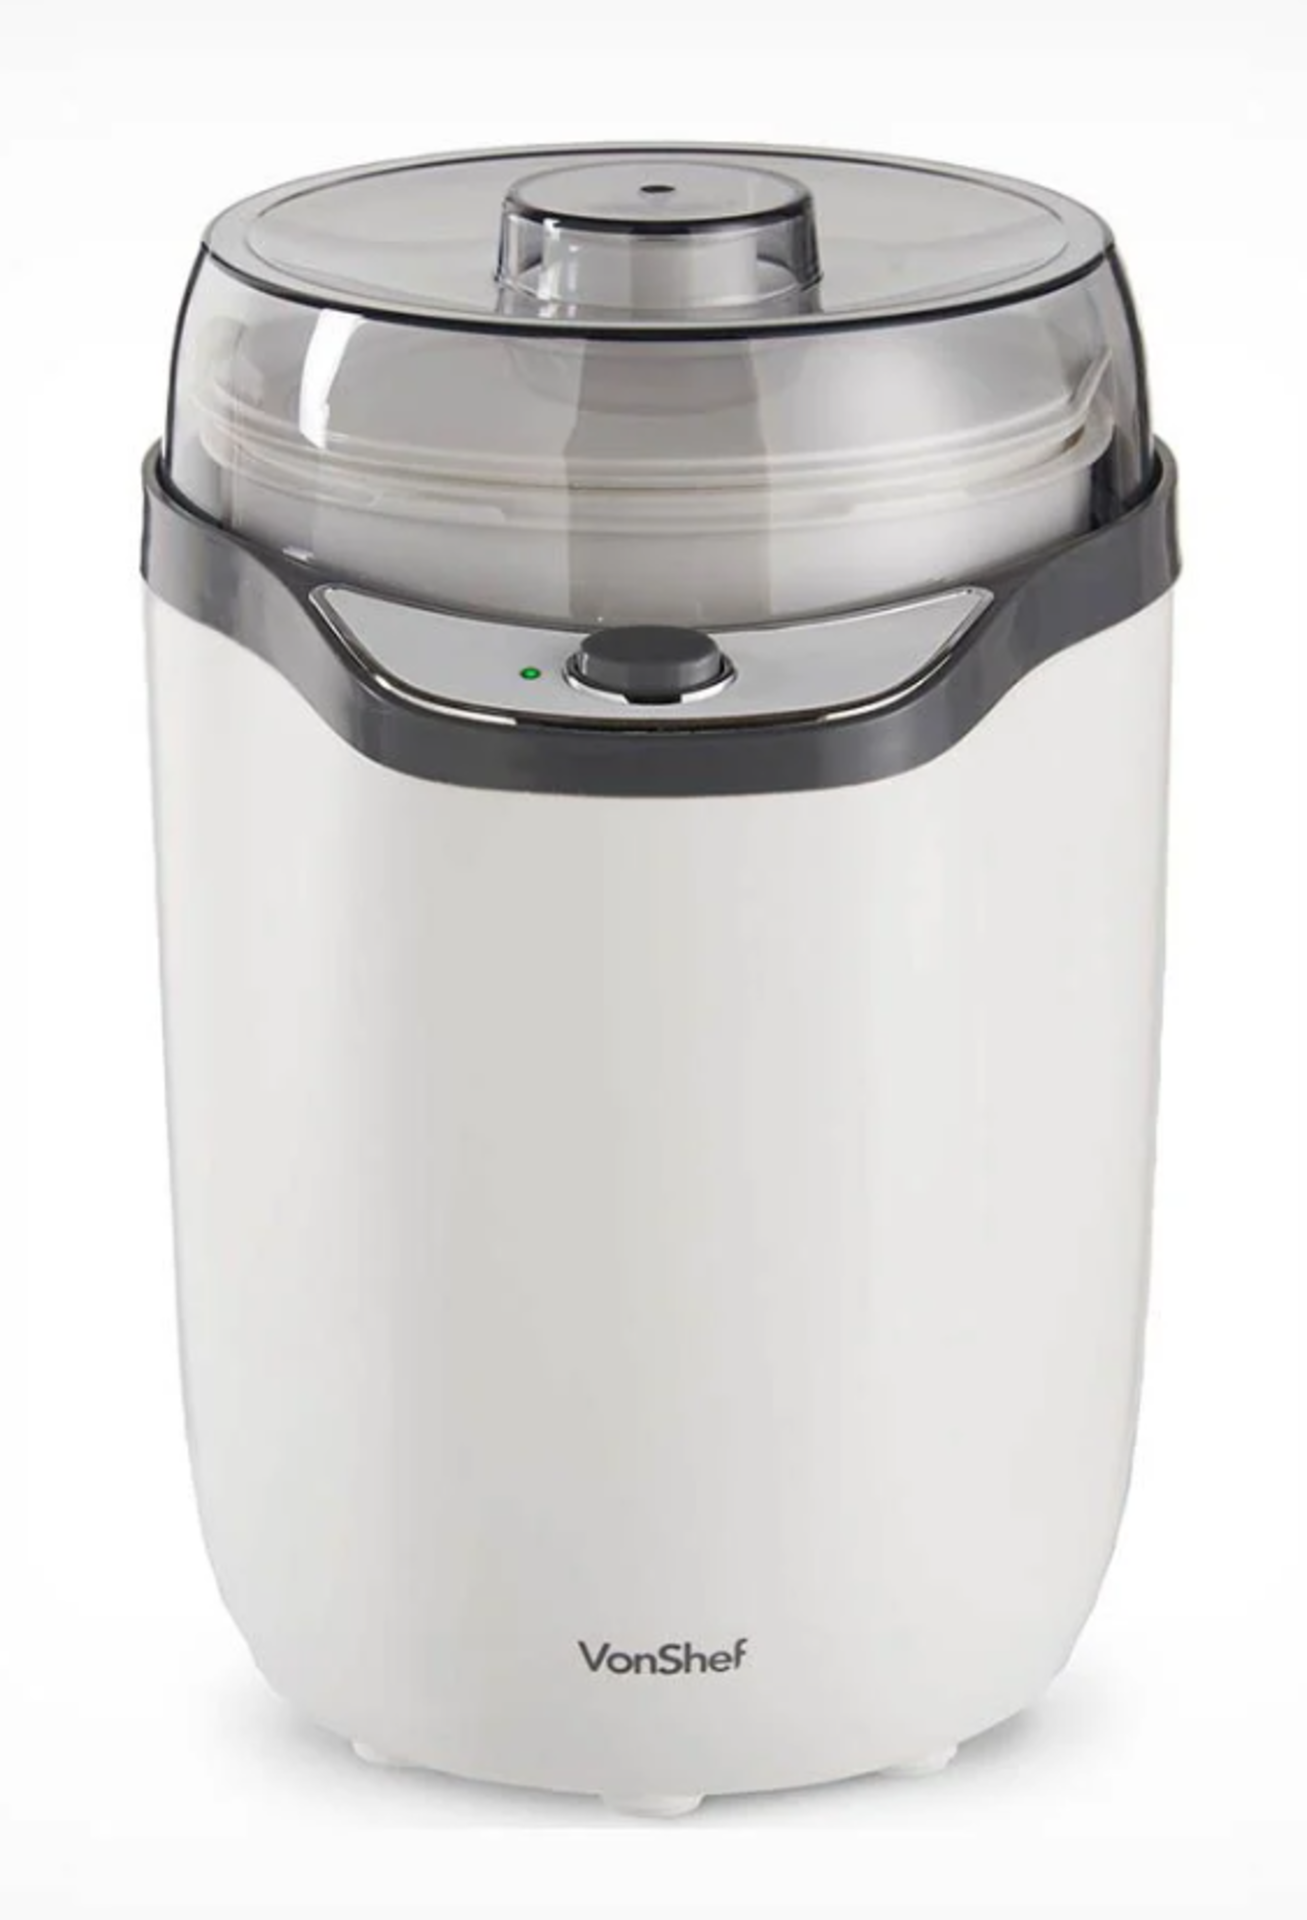 Greek Yoghurt Maker. With the ability to make normal and Greek yoghurt, if it’s choice you’re after,